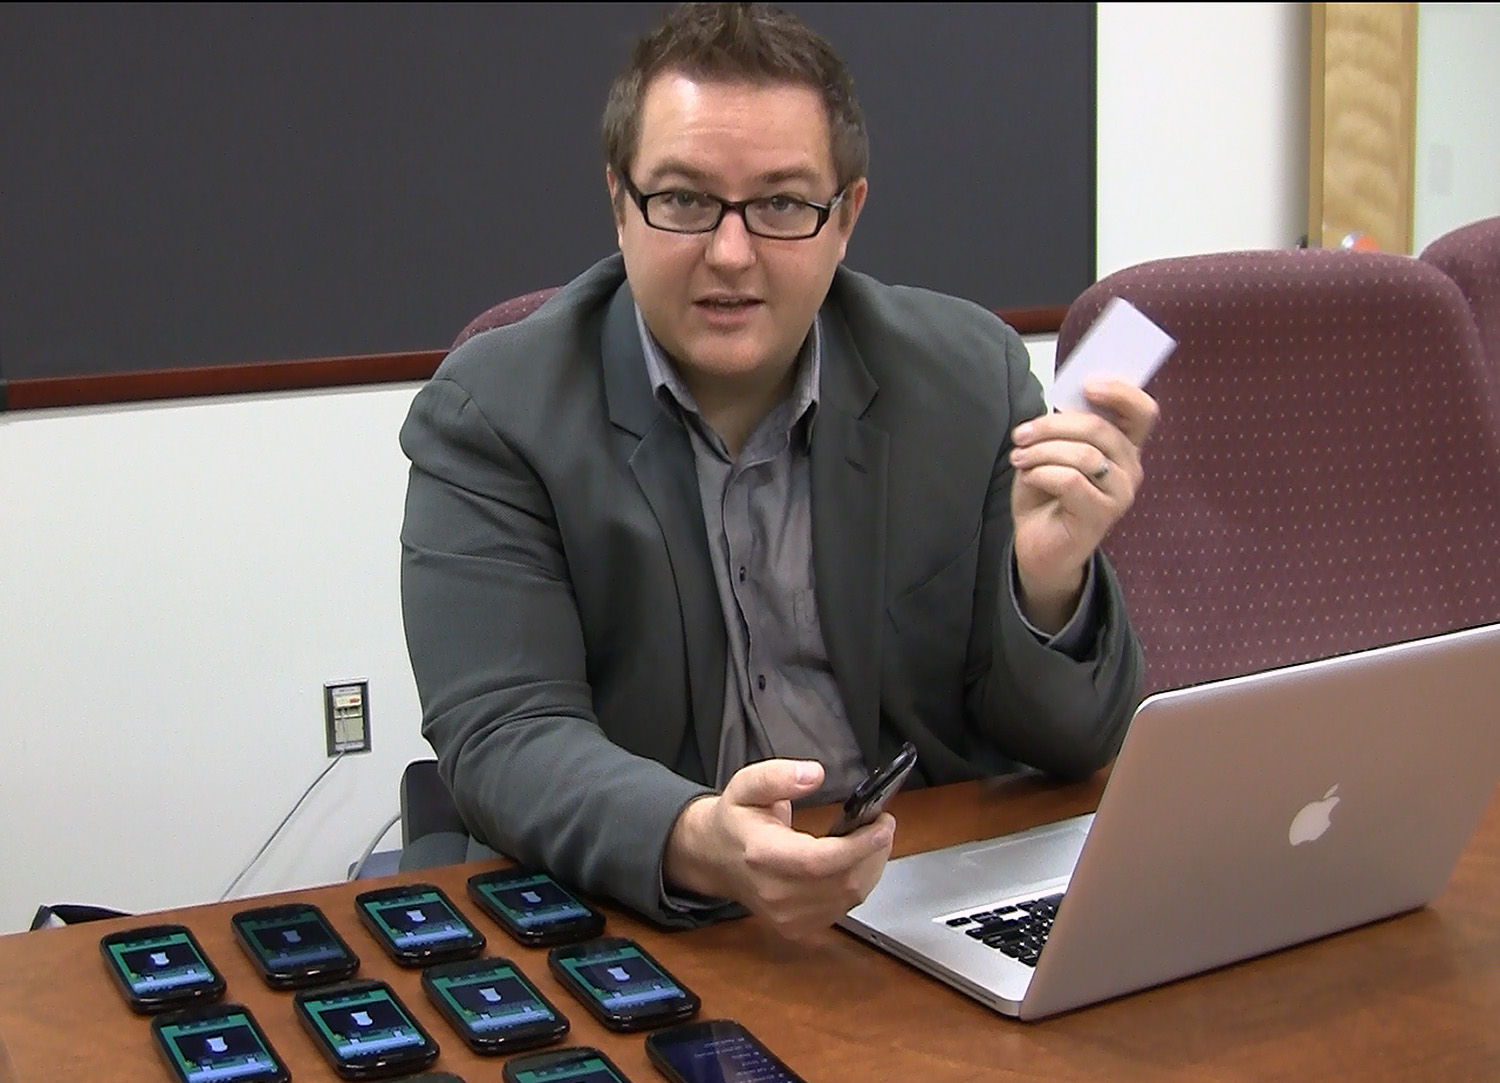 Jules White with laptop that controls the bank of cell phones